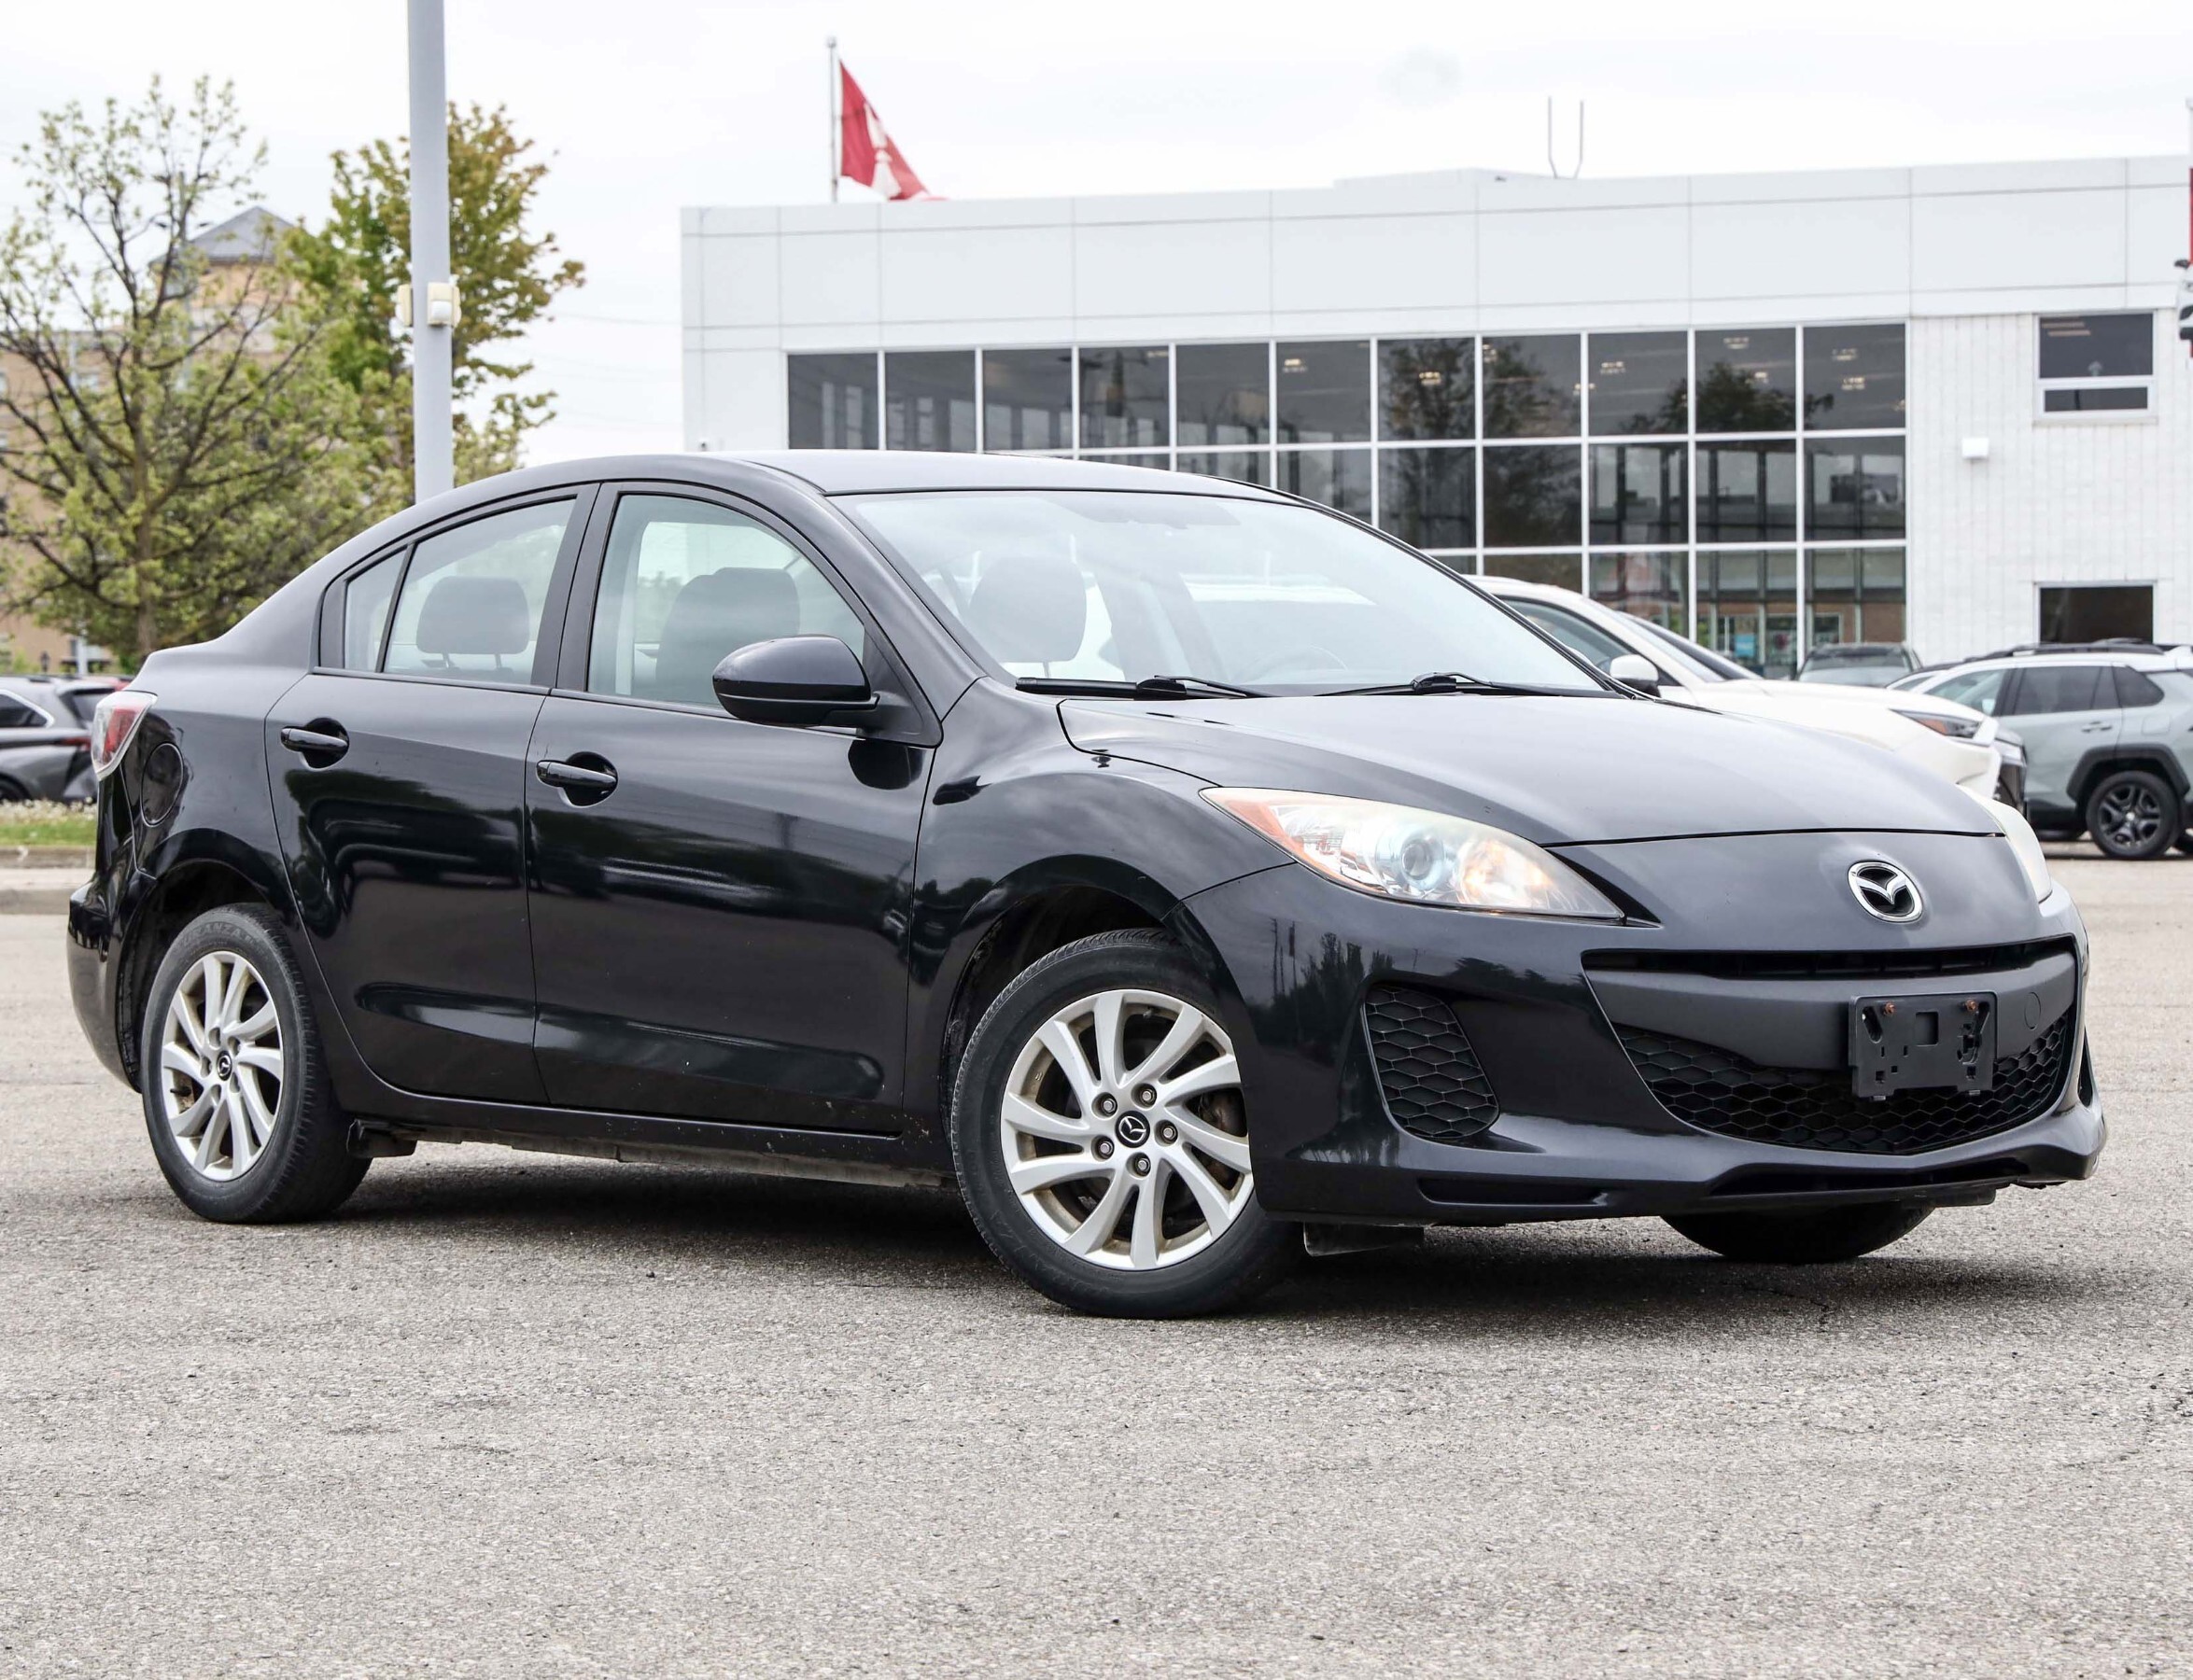 2013 Mazda Mazda3 GS-SKY HEATED FRONT SEATS | CLEAN CARFAX